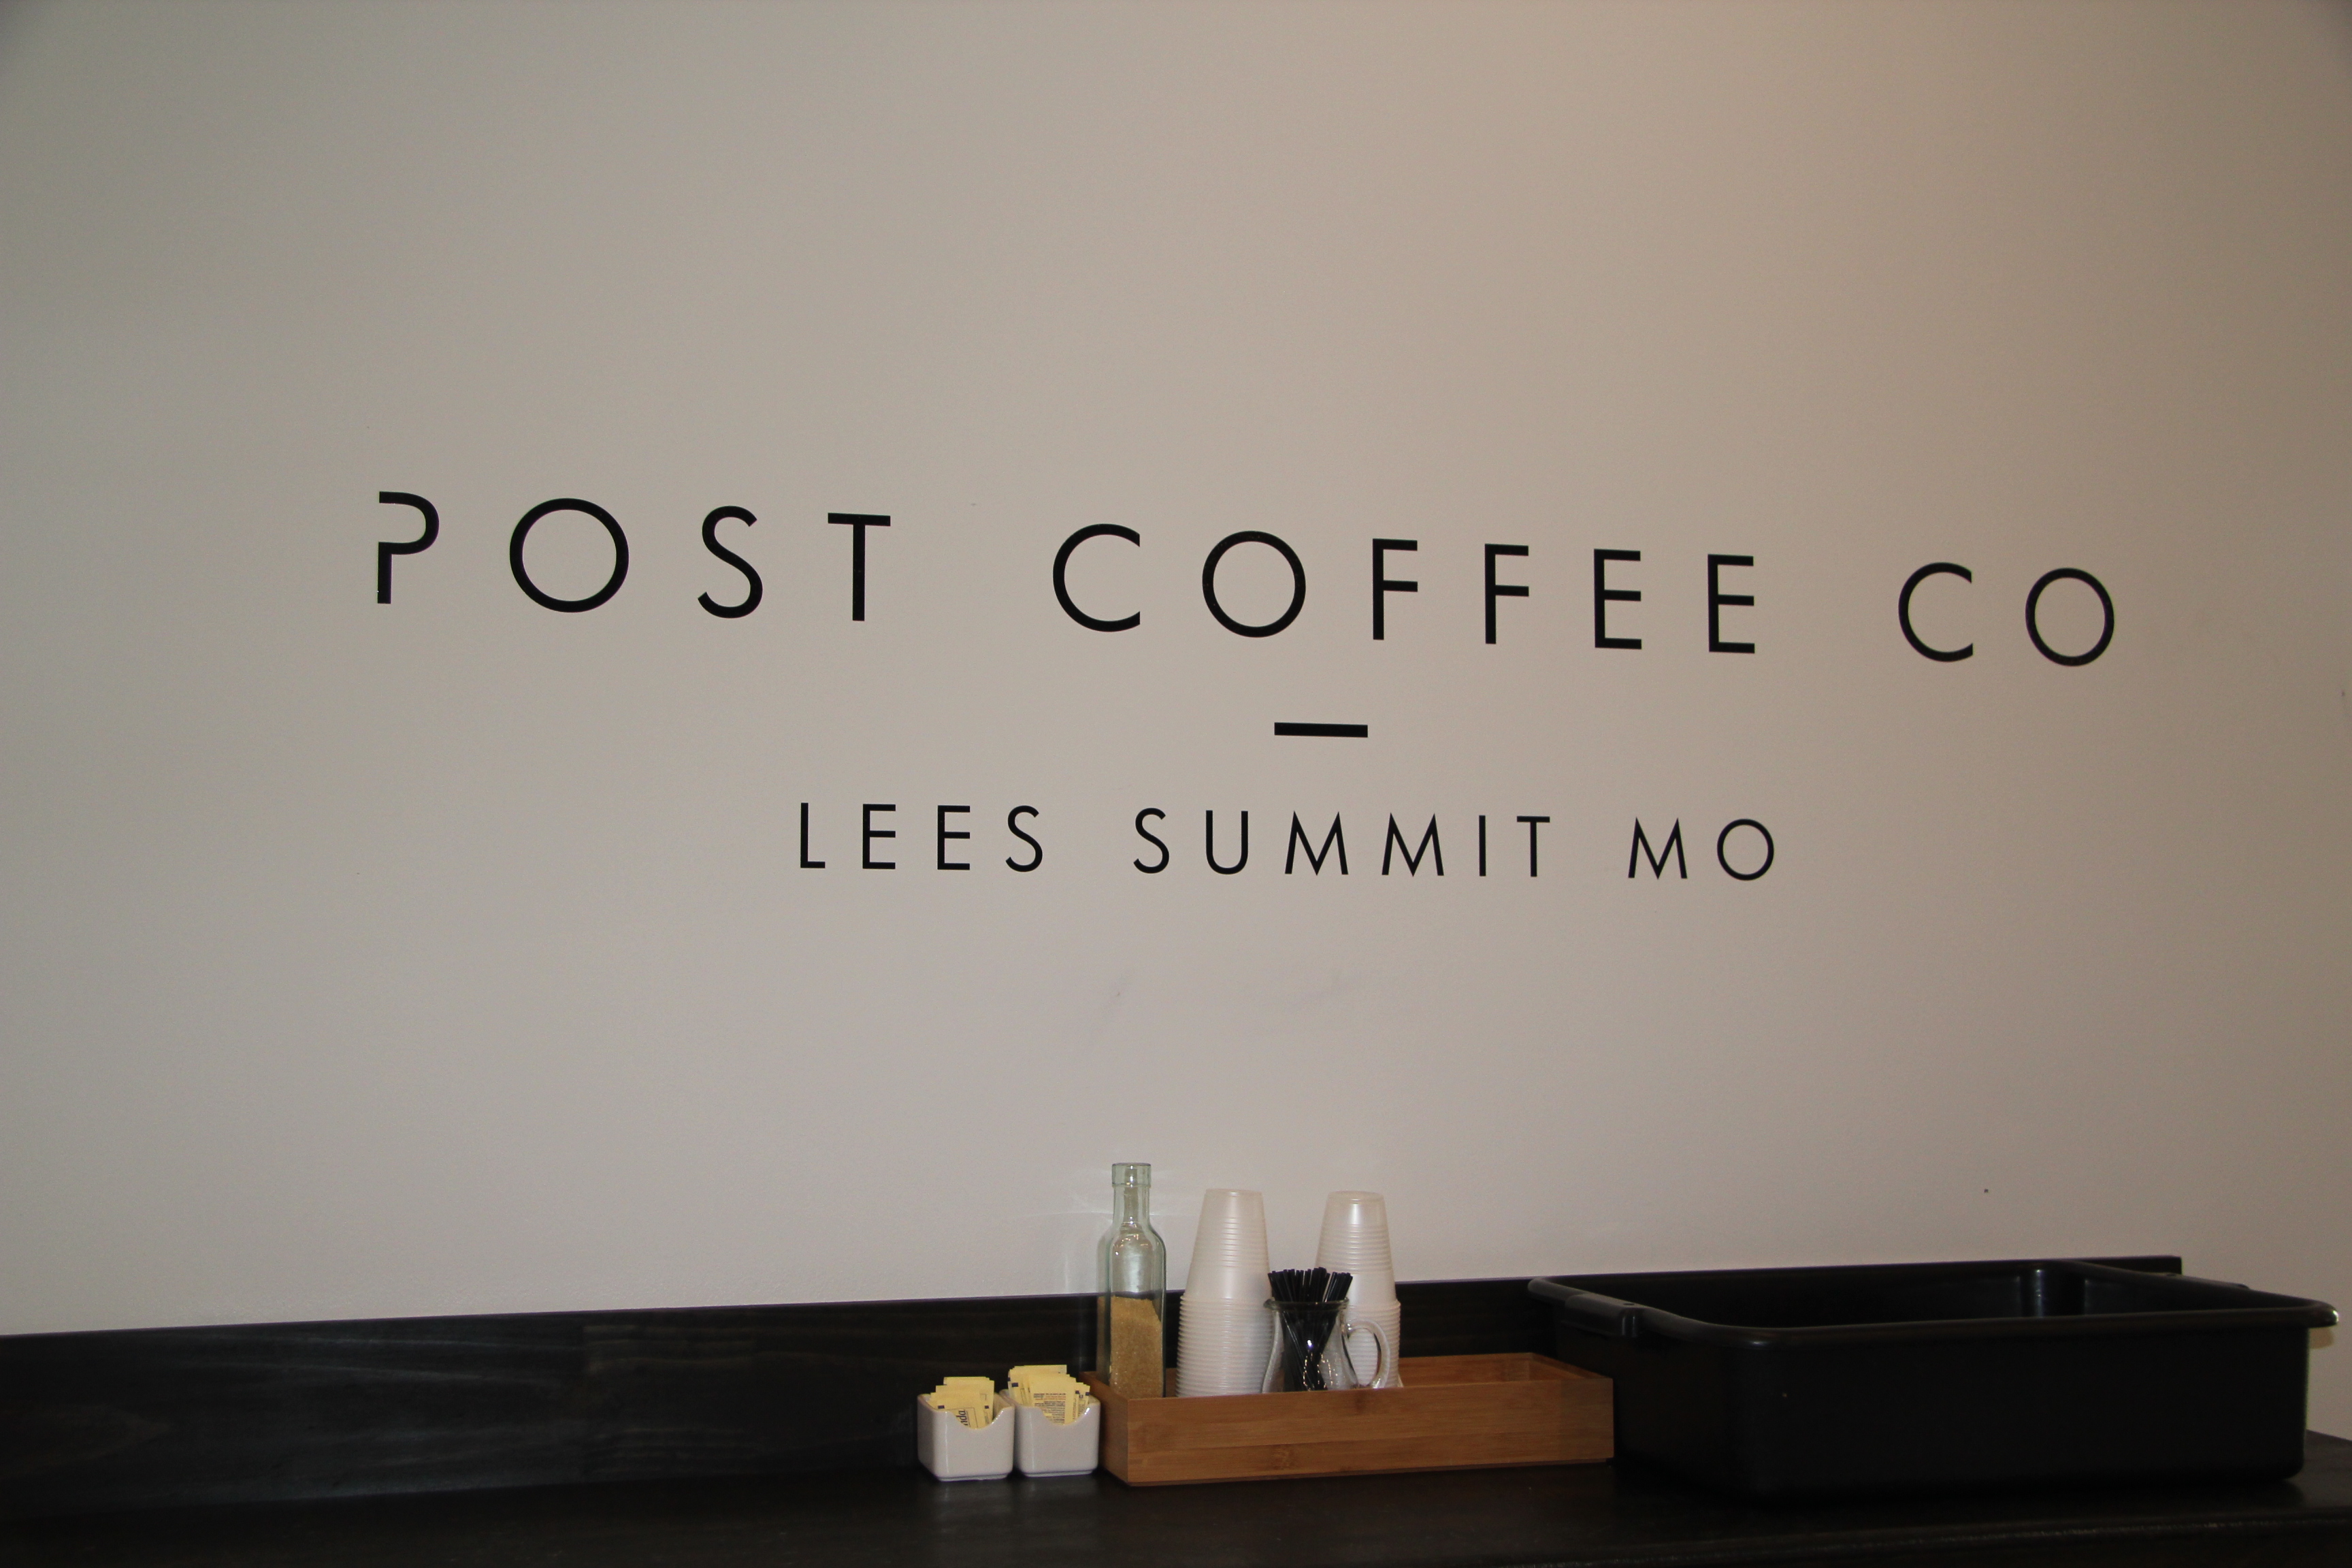 New coffee shop takes over Lee's Summit – LSW Online